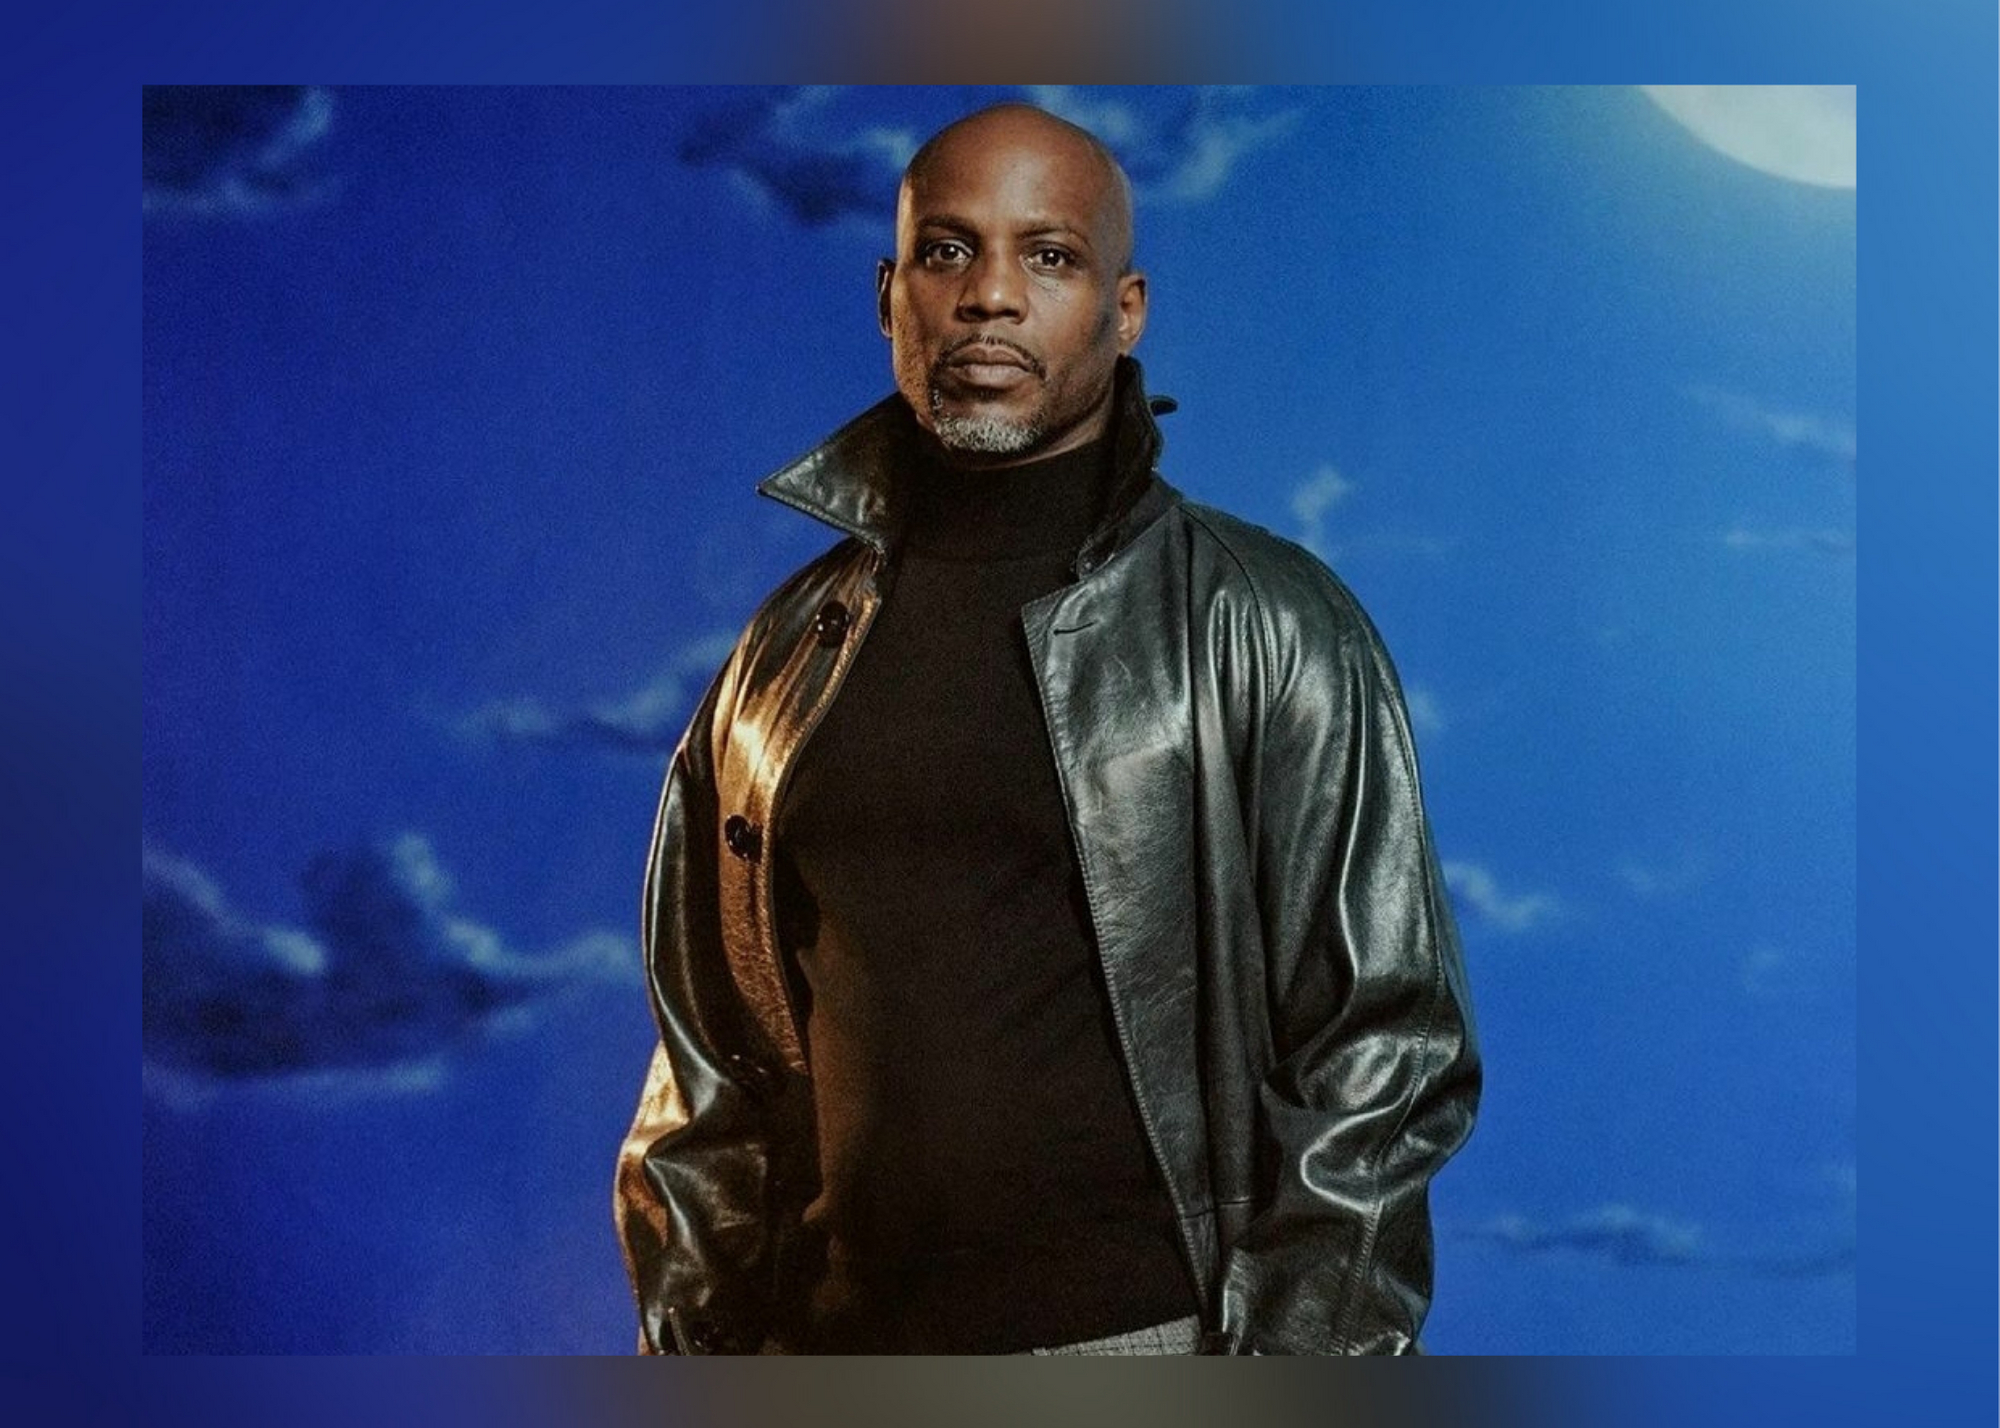 DMX Has Passed Away At 50, Family Says